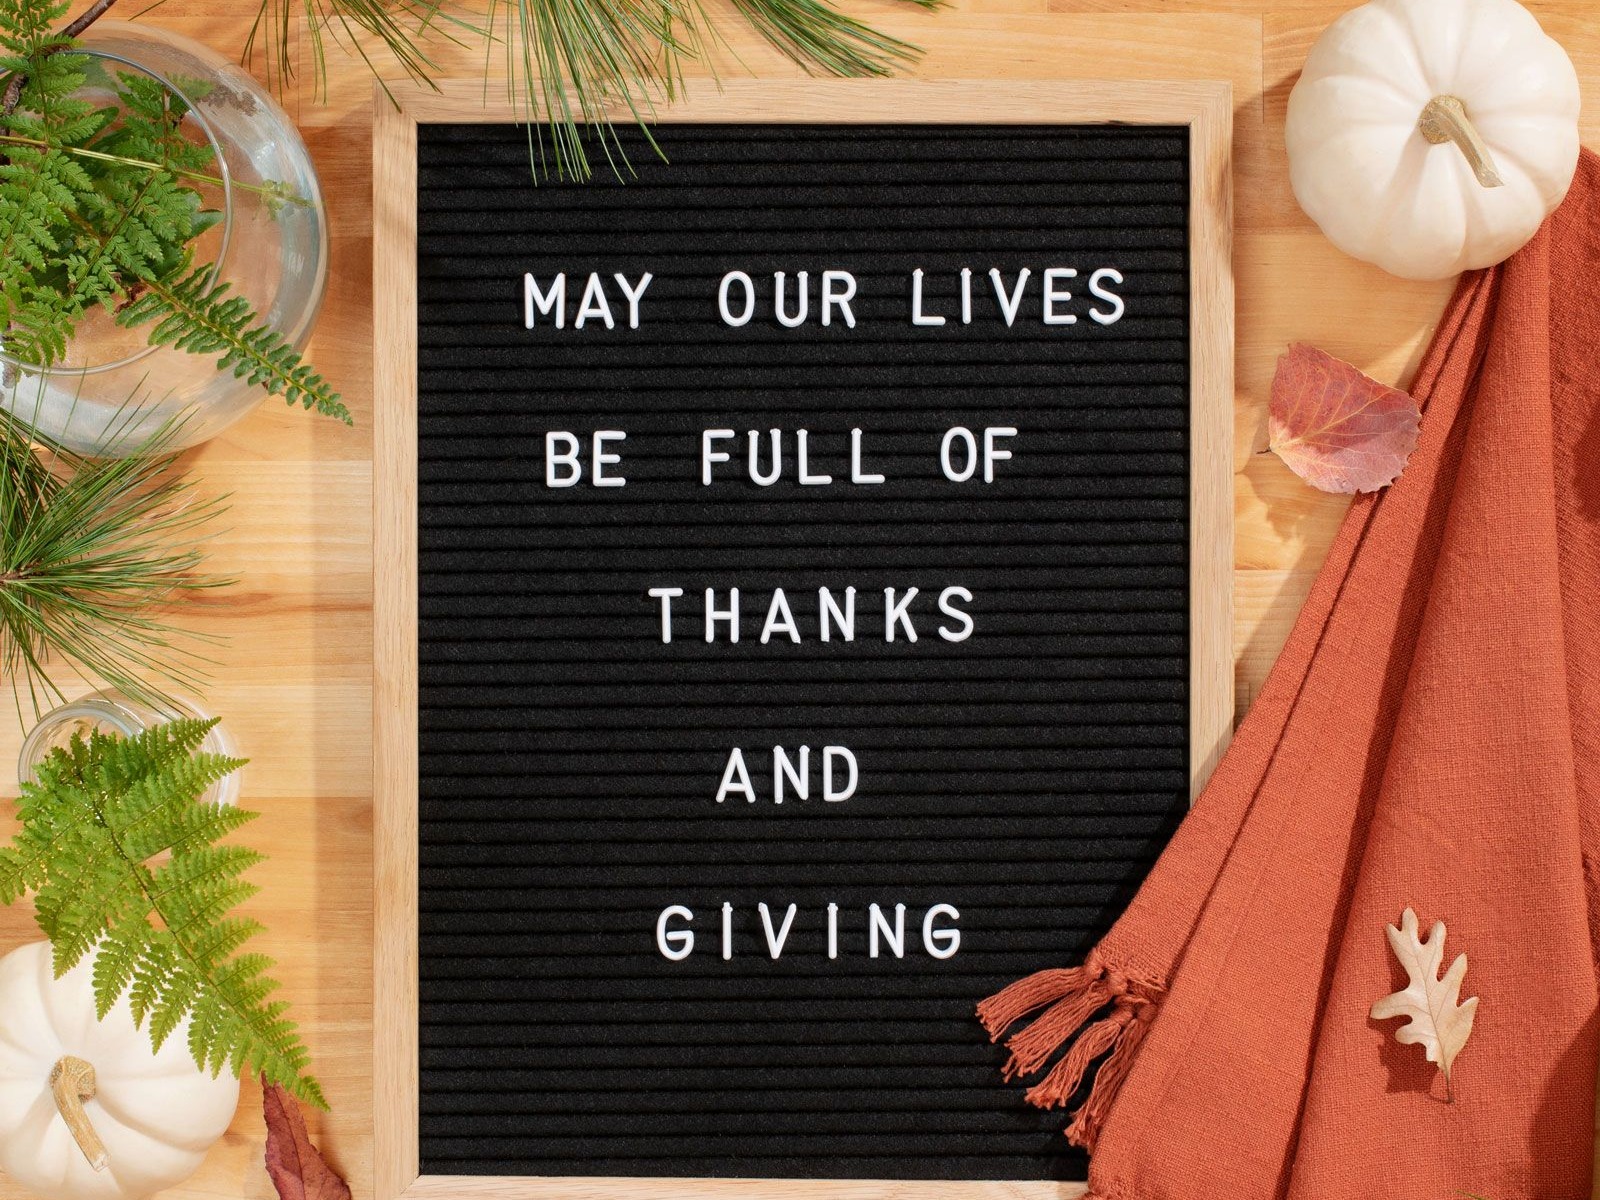 Image of board with white letters that say "May our lives be full of thanks and giving" next to white decorative pumpkin and orange towel